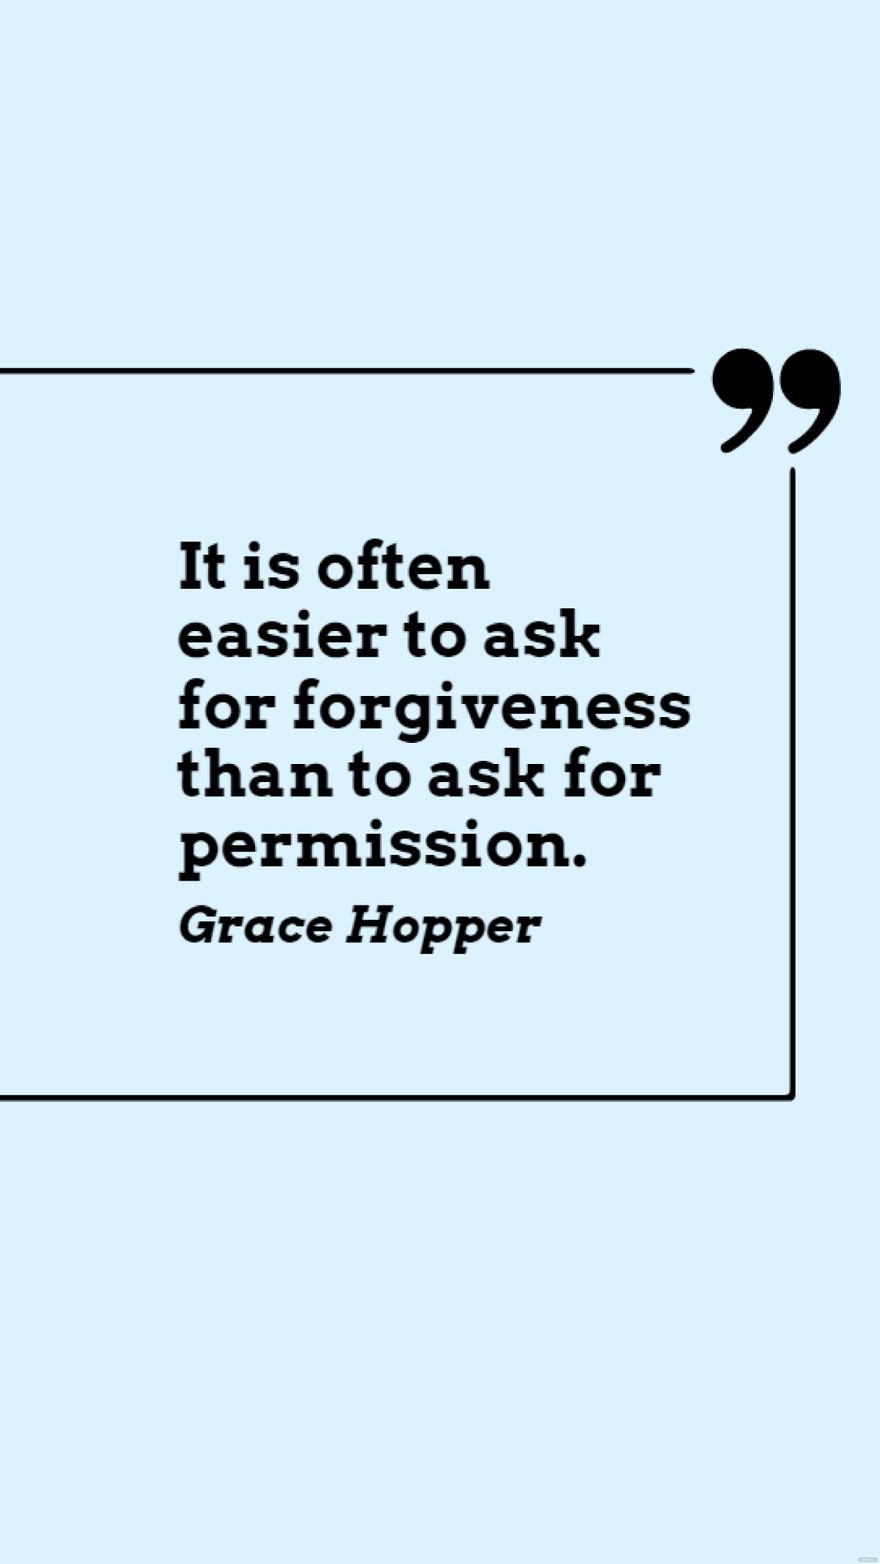 Grace Hopper - It is often easier to ask for forgiveness than to ask for permission.